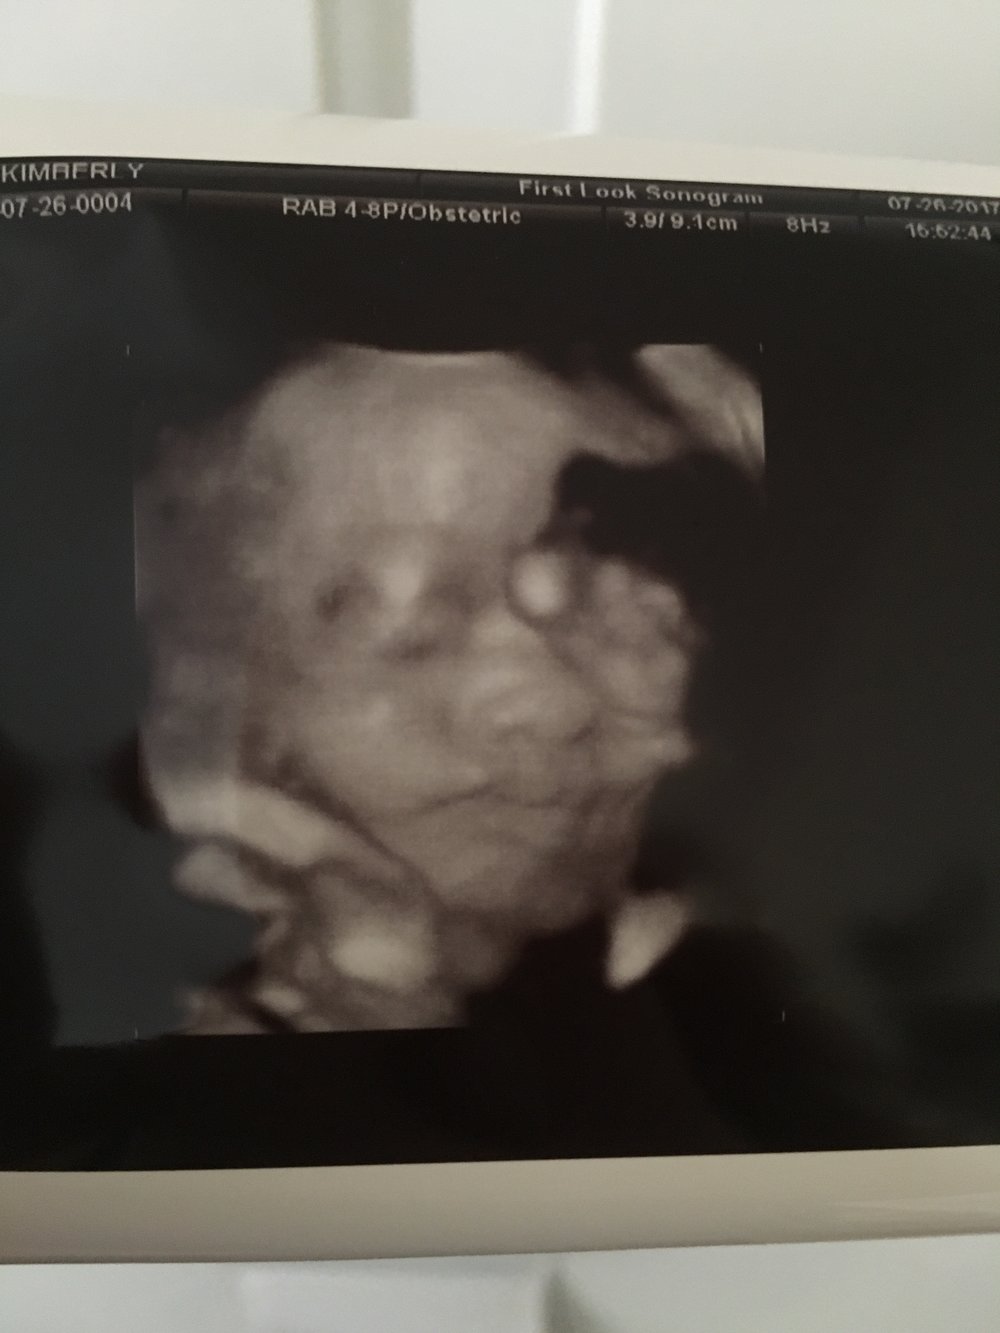  Image from our 4D ultrasound at 31 weeks.&nbsp; 